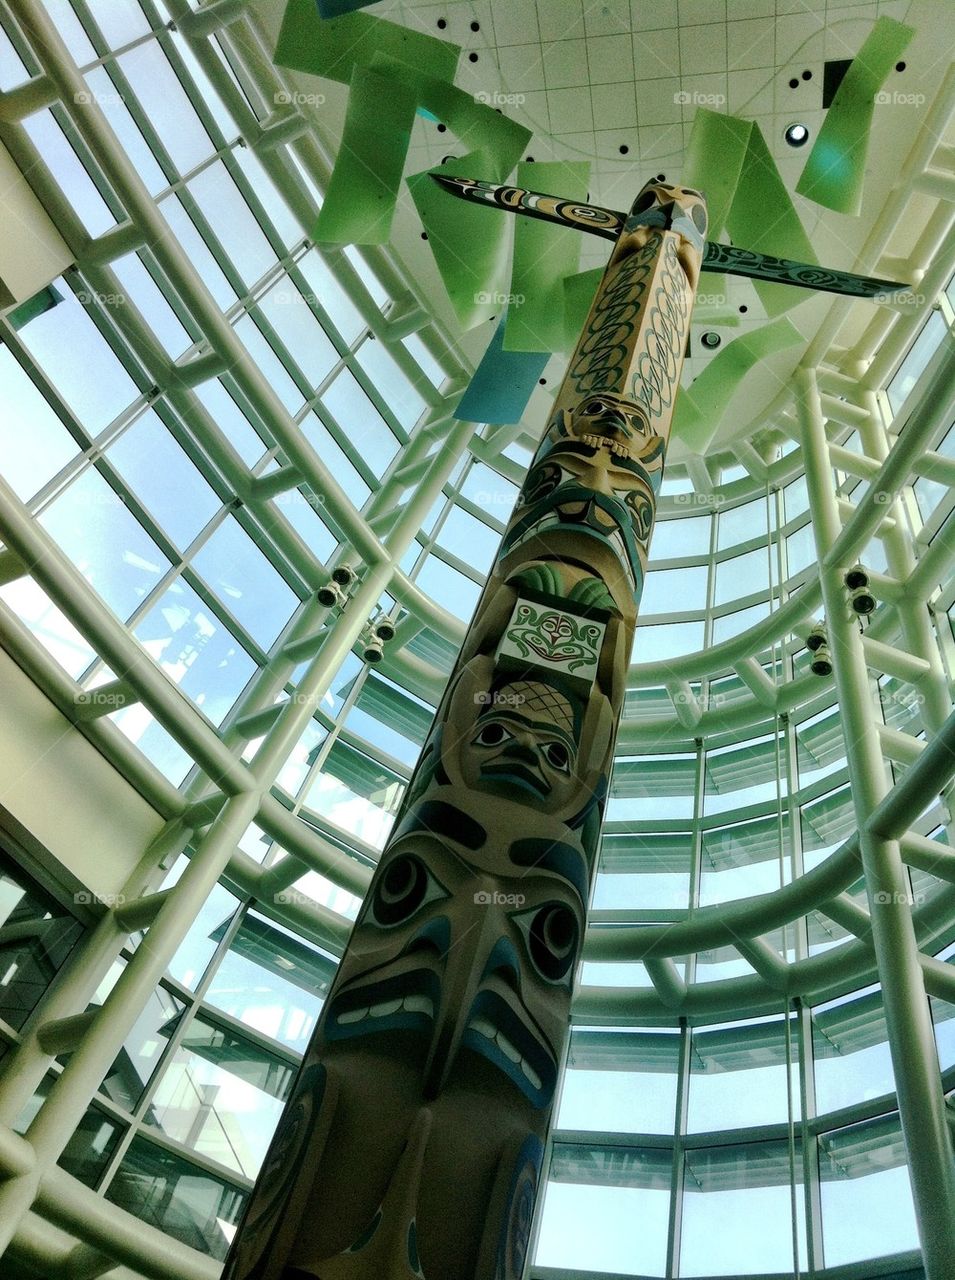 Totem at Vancouver airport